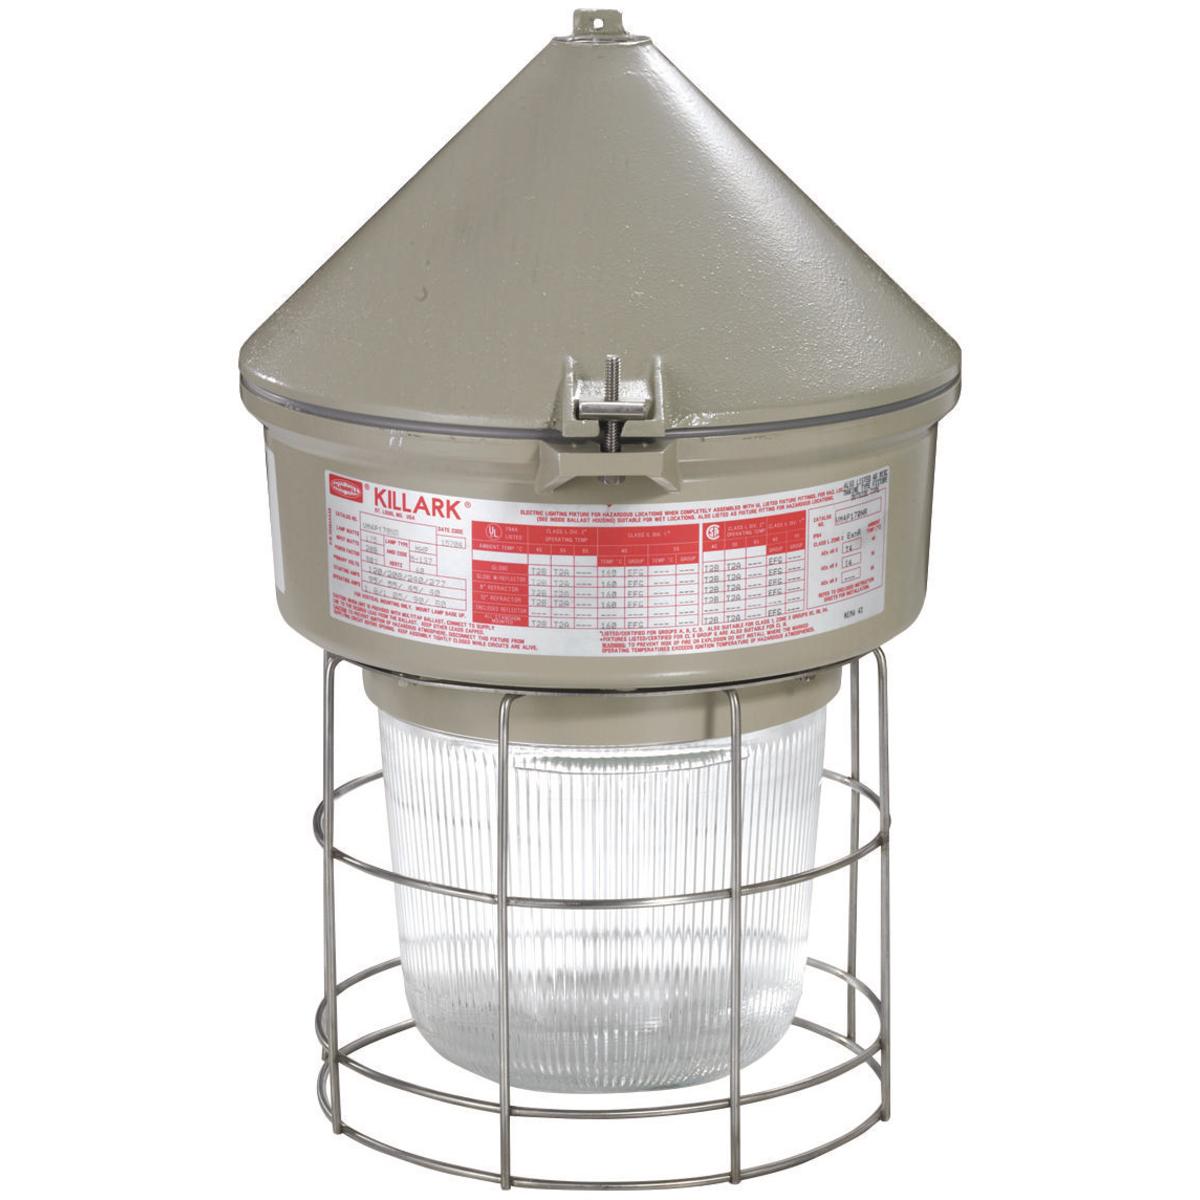 Hubbell VM4H105C2GLG VM4 Series - 100W Metal Halide 480V - 3/4" Cone Top - Globe and Guard  ; Ballast tank and splice box – corrosion resistant copper-free aluminum alloy with baked powder epoxy/polyester finish, electrostatically applied for complete, uniform corrosion prote